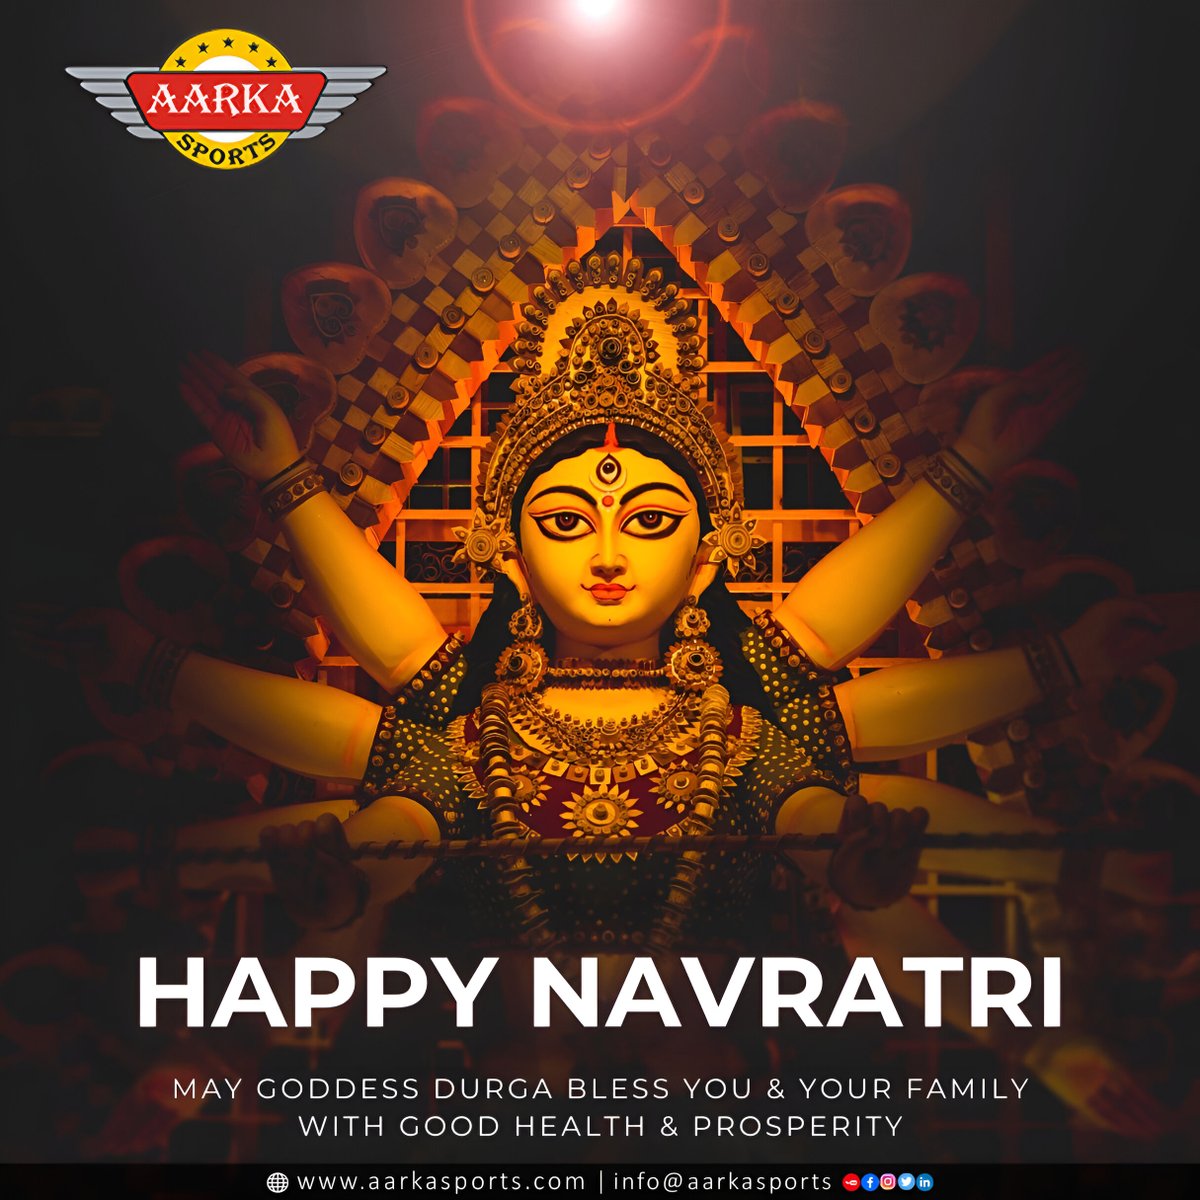 🎉 Wishing everyone a joyous and prosperous Navratri from Aarka Sports Management Pvt Ltd! 🙏🌼

May this auspicious occasion fill your life with happiness, prosperity, and blessings. Let the celebrations begin! 🌟 

#Navratri #AarkaSports #FestiveGreetings #Blessings #Joy 🎊